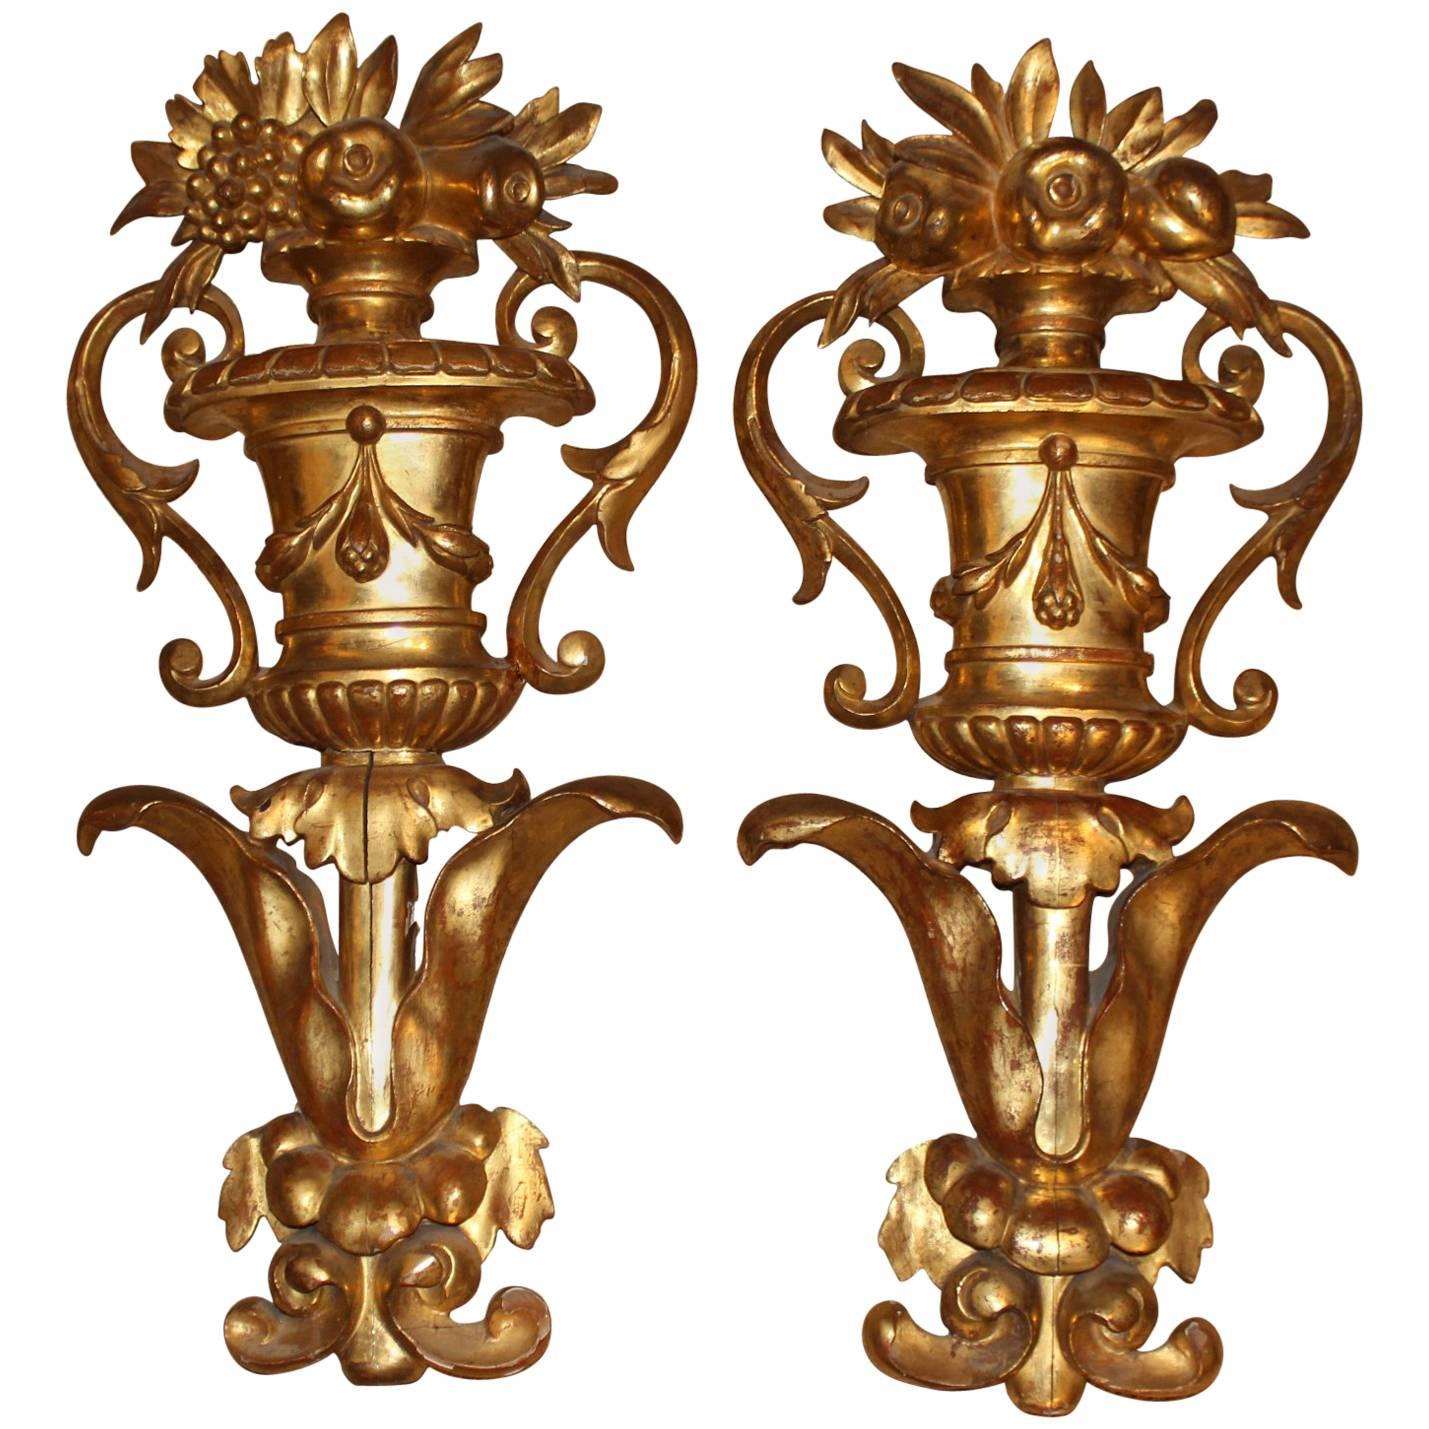 Pair of Continental Wooden Gilt Urn Wall Decorations Architectural Elements